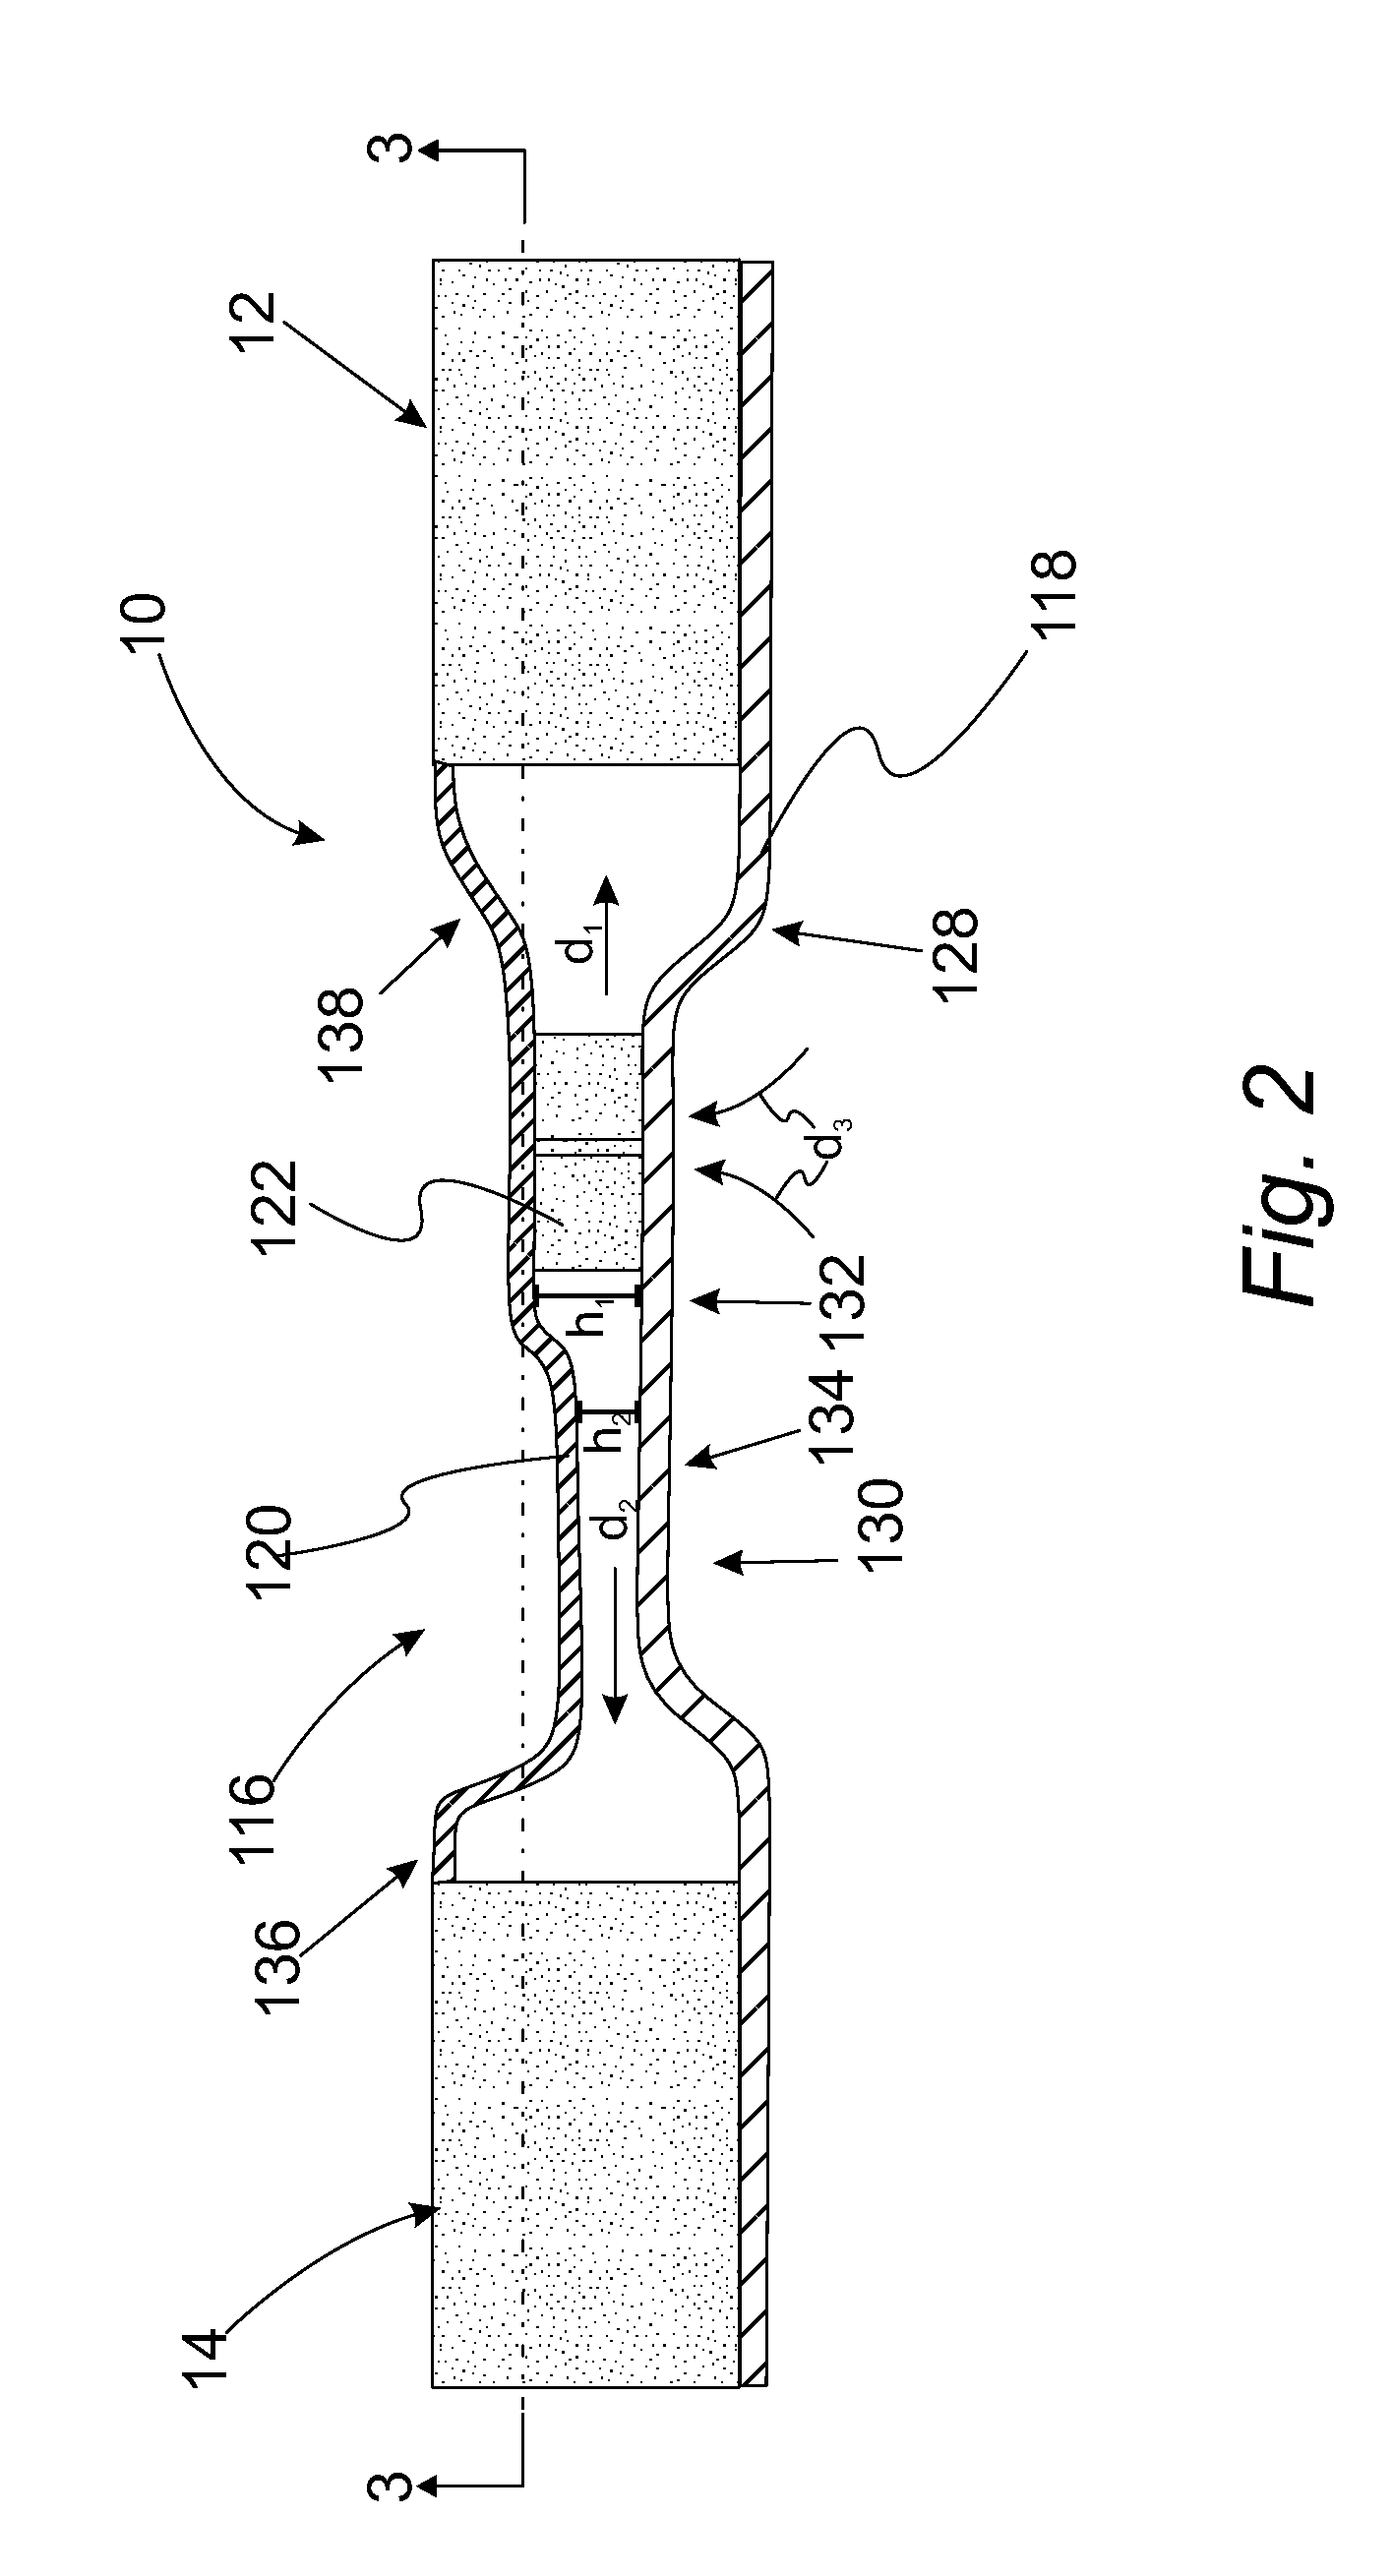 Integrated and Optimized Battery Cooling Blower and Manifold